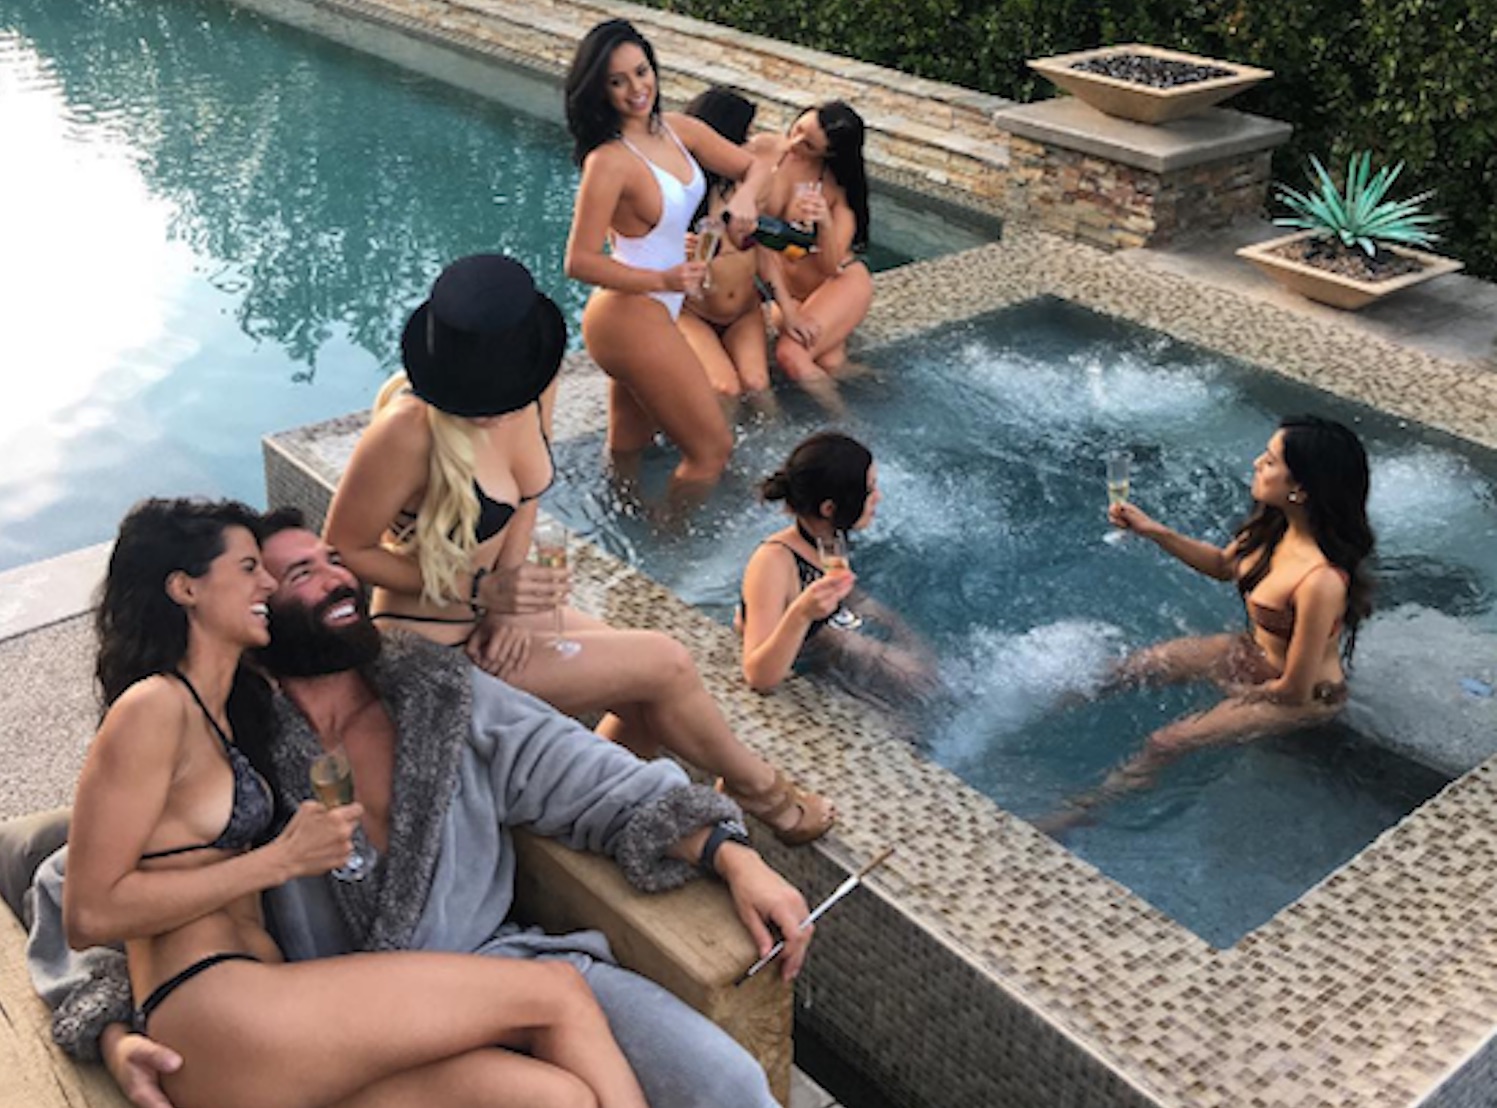 Swimming Pool Party - Dan Bilzerian Just Live Streamed His Party And It's Pretty ...